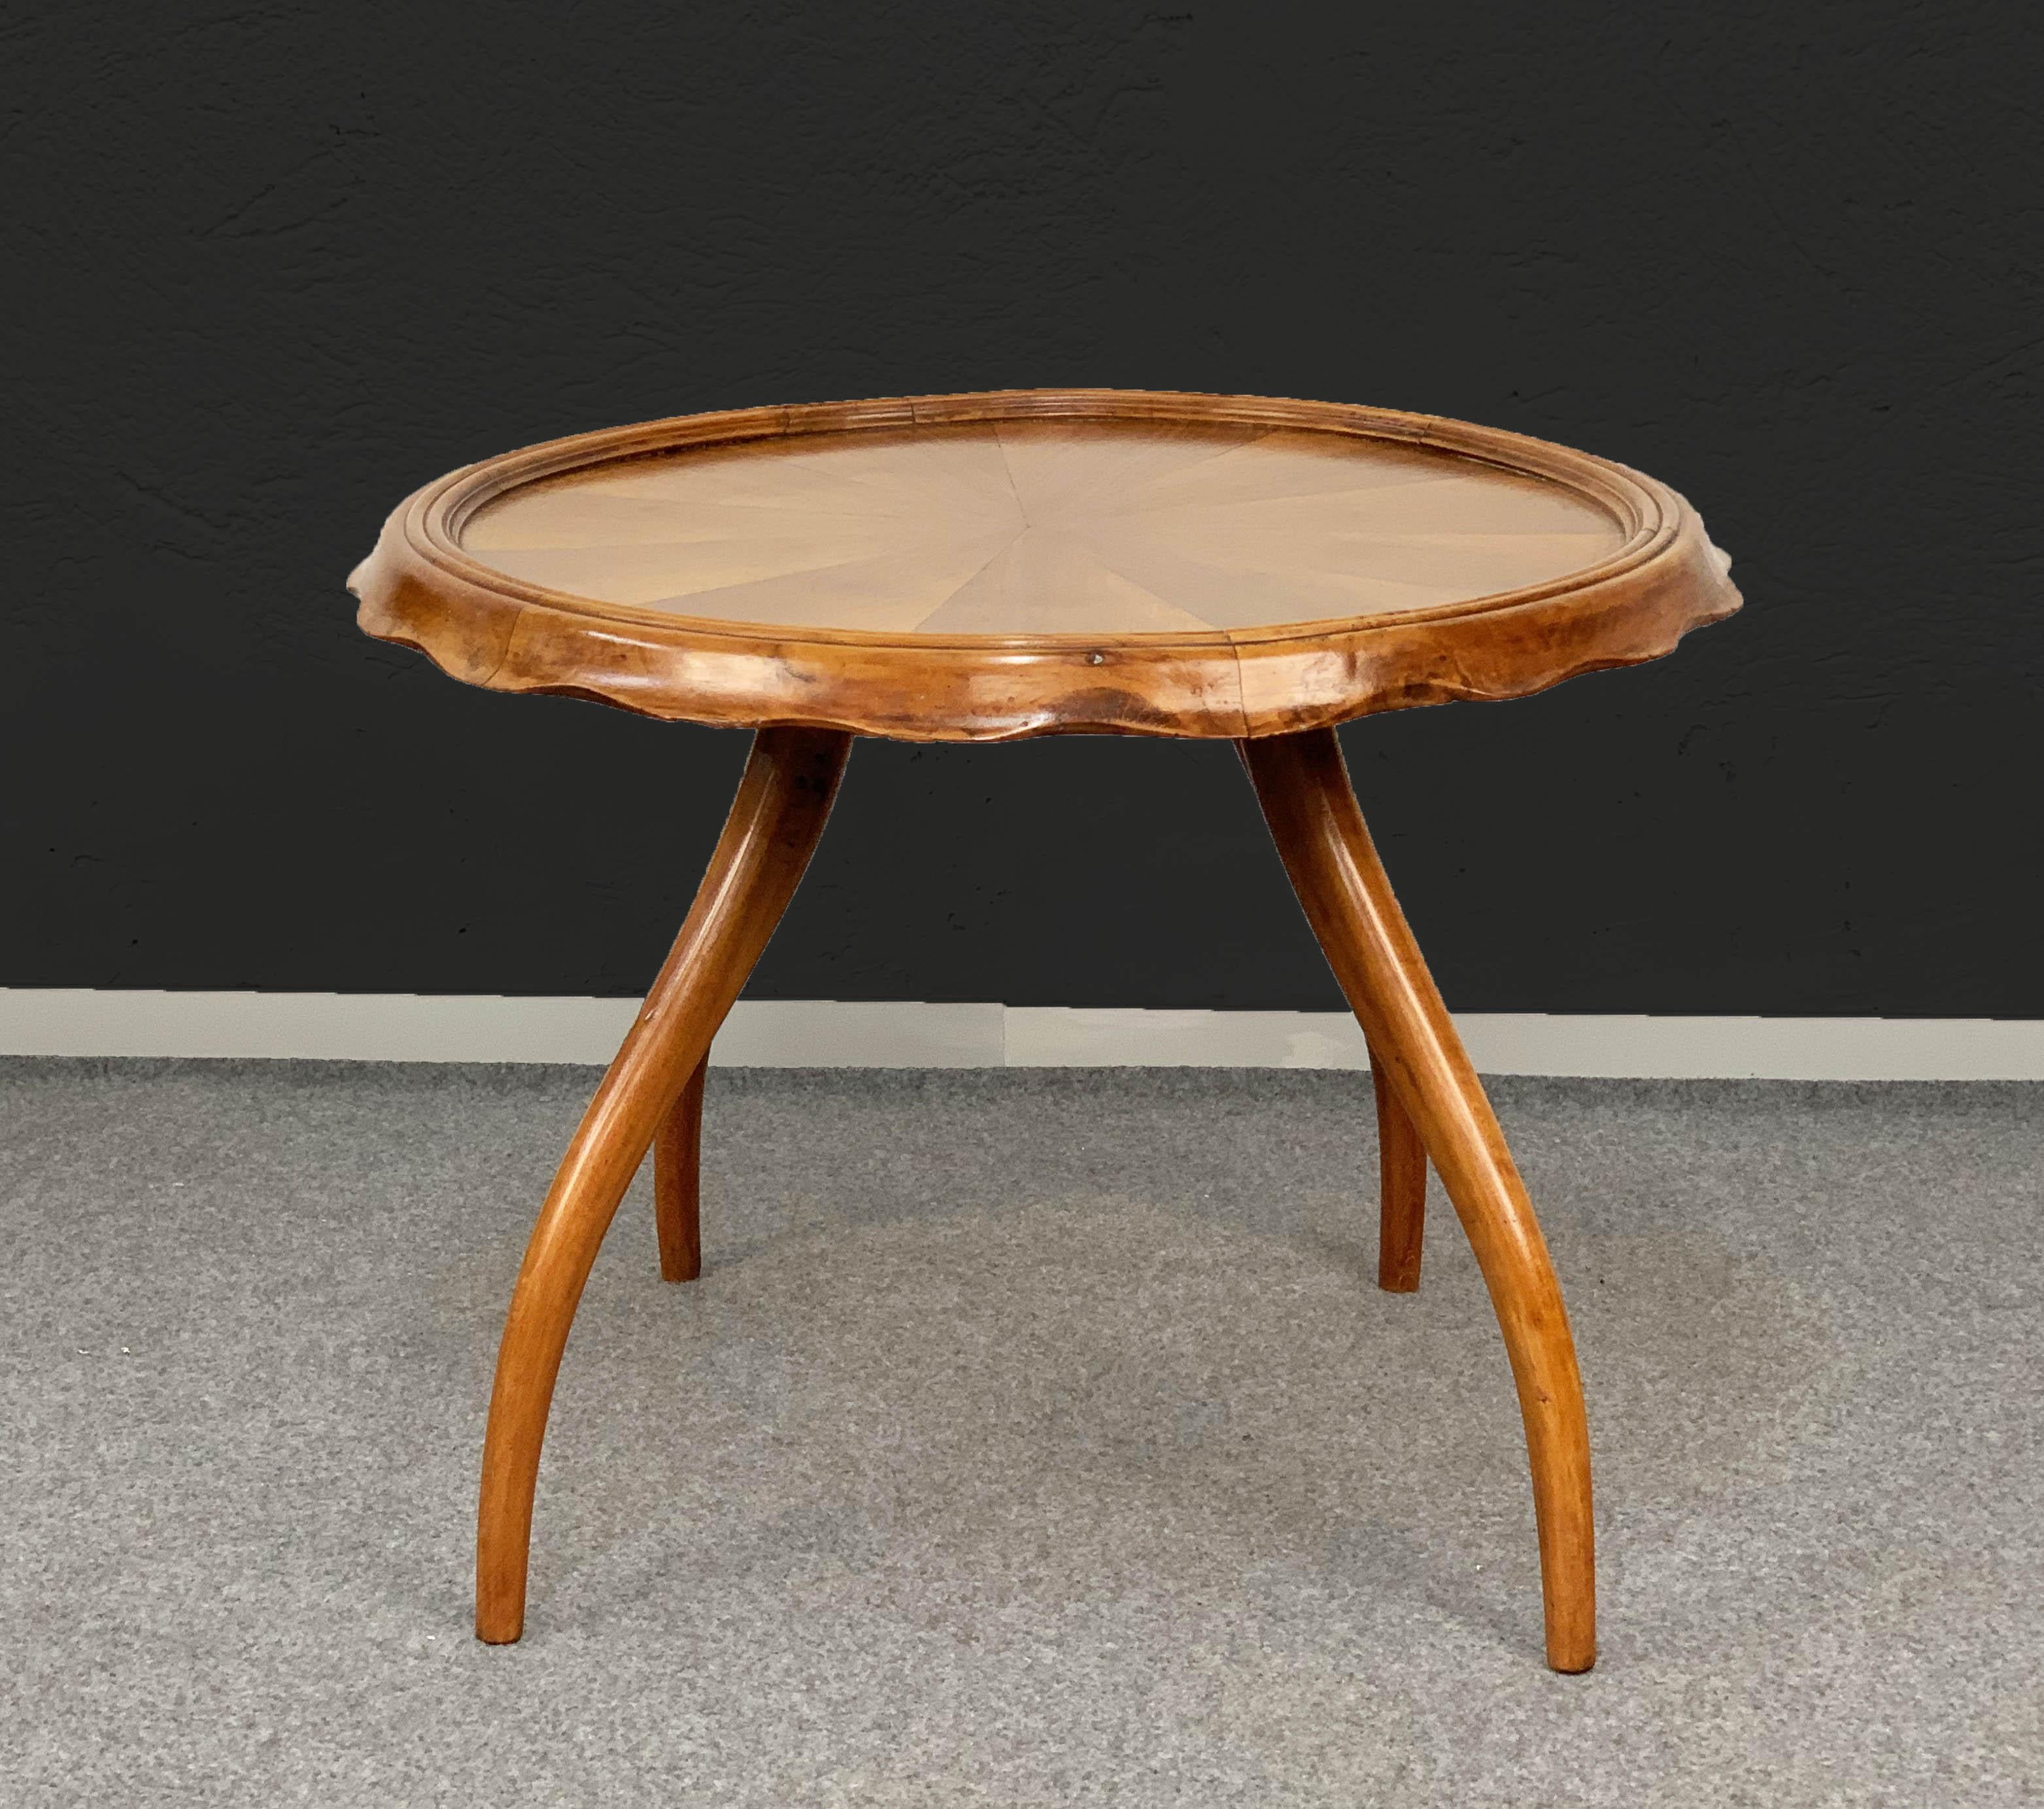 Refined and elegant round table by Arredamenti Borsani, 1930s four sinuous curved legs, an important edge in the shape of a bottle stopper. Excellent condition, beautiful original patina blonde walnut 
Measurements: Height 49 cm; diameter 65 cm.